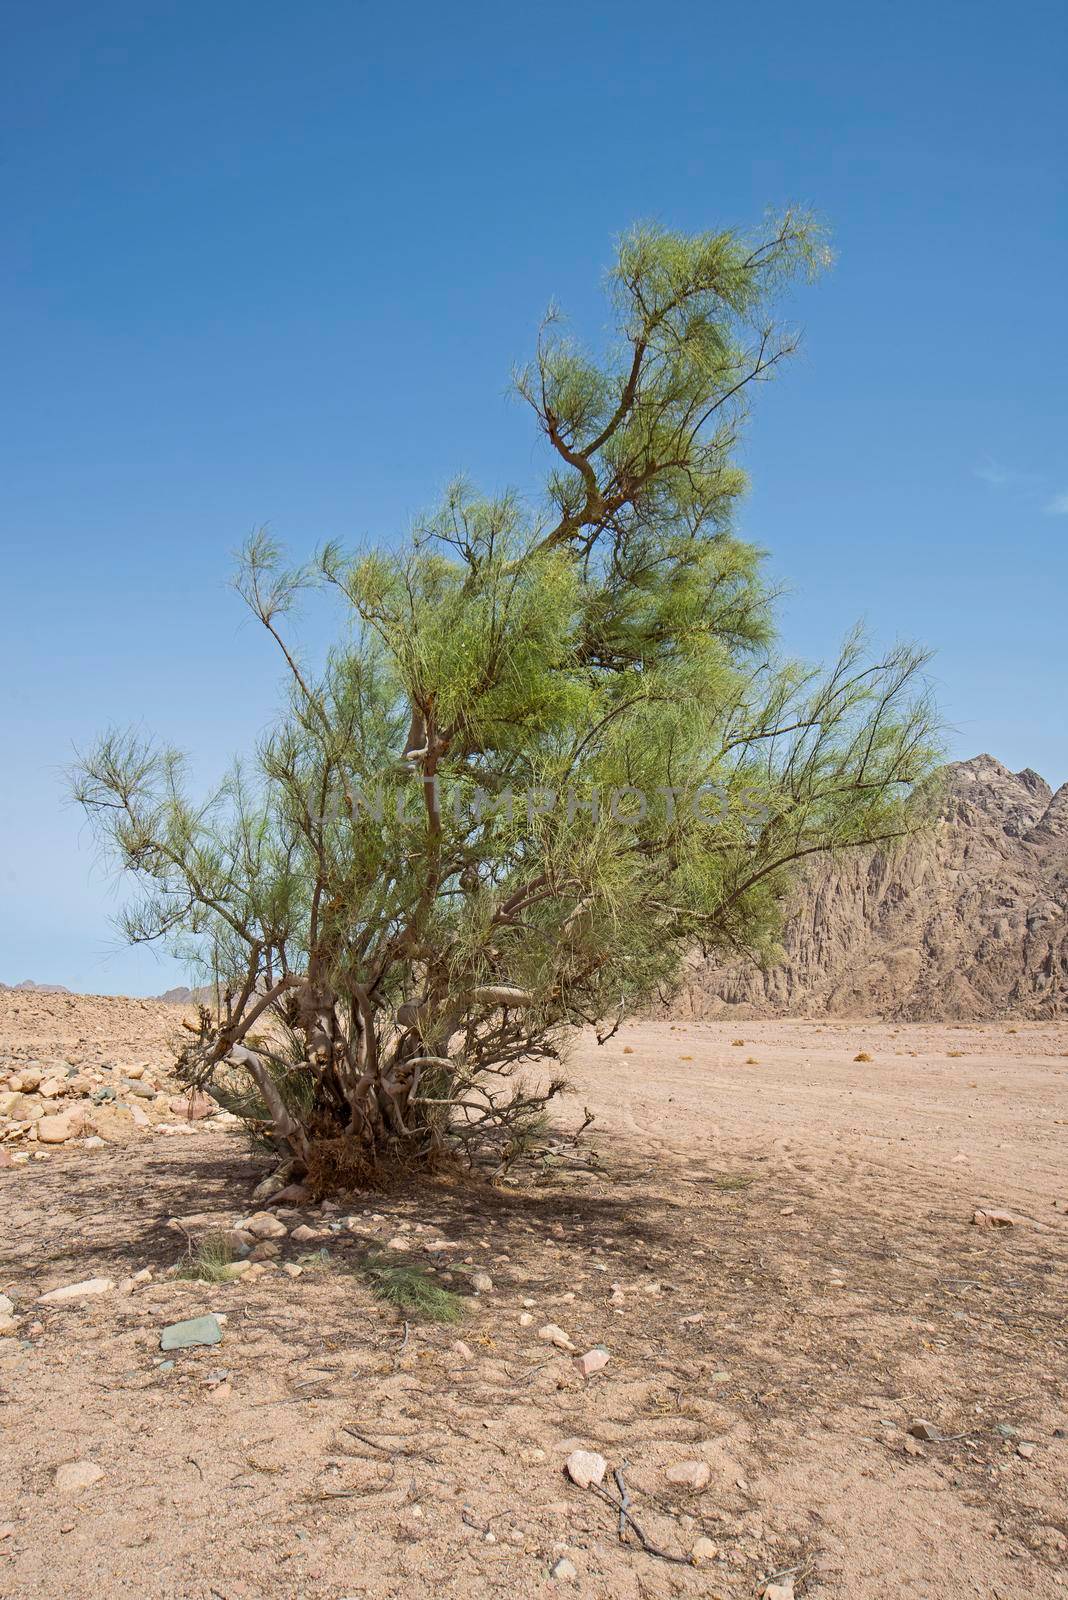 Landscape scenic view of desolate barren eastern desert in Egypt with lone acacia tree and mountains